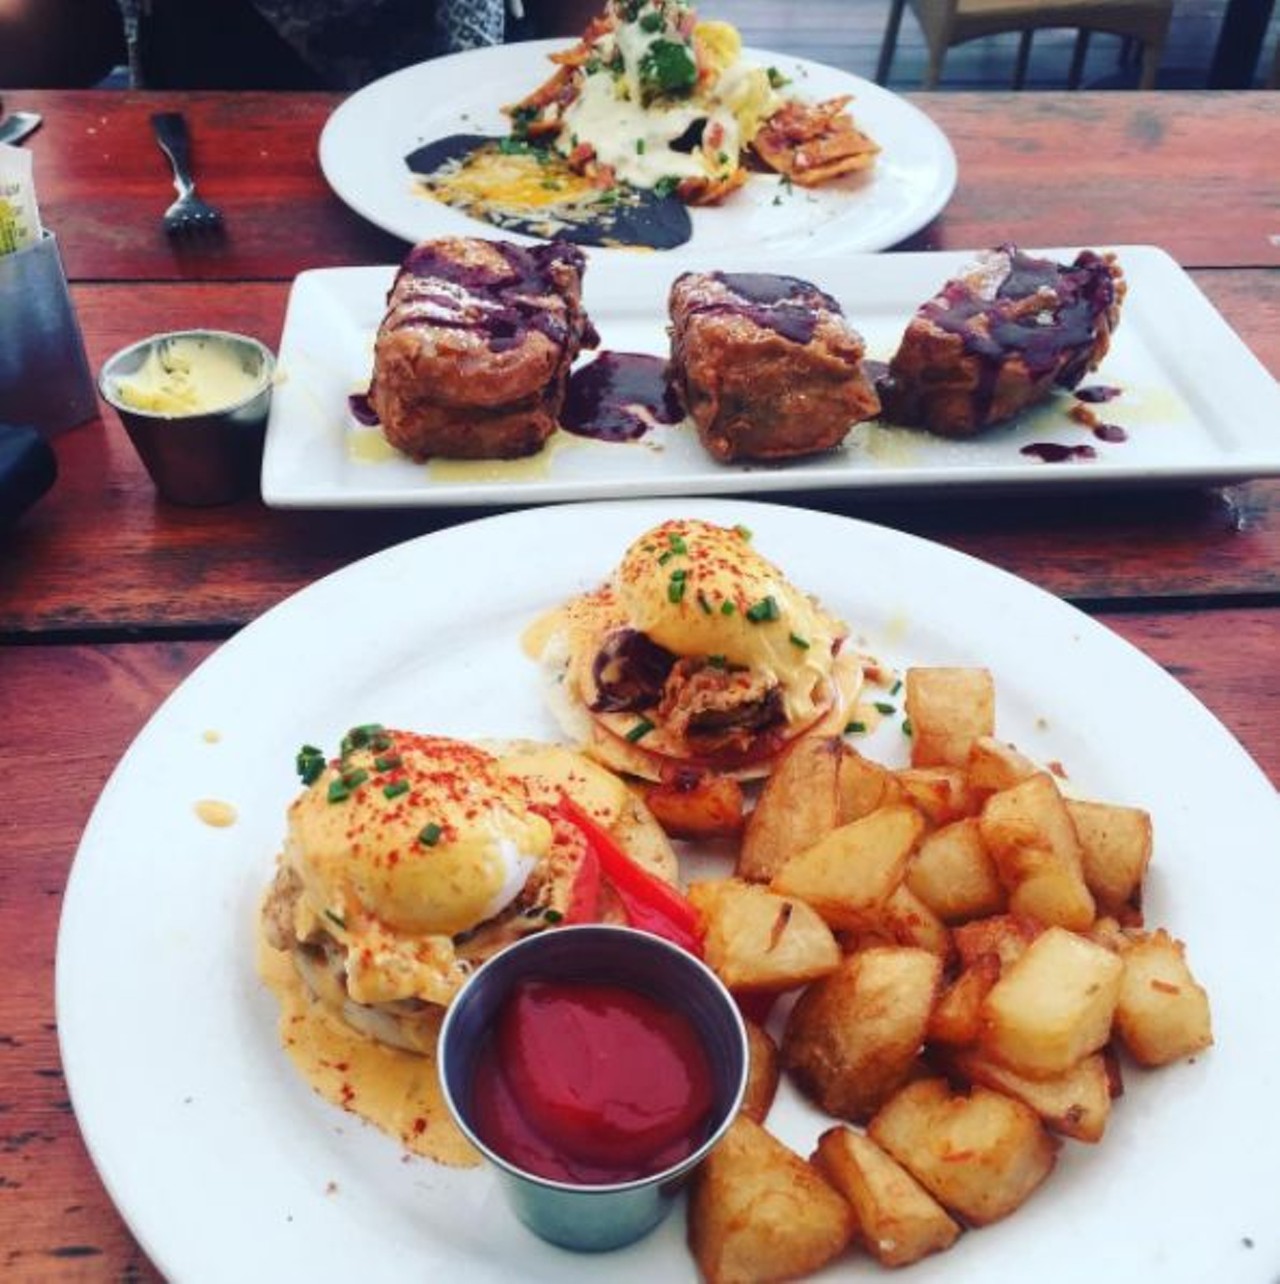 Best Brunch
Cover 3, 1806 Loop 1604, (210) 479-9700
Photo via Instagram, mmamarycarr